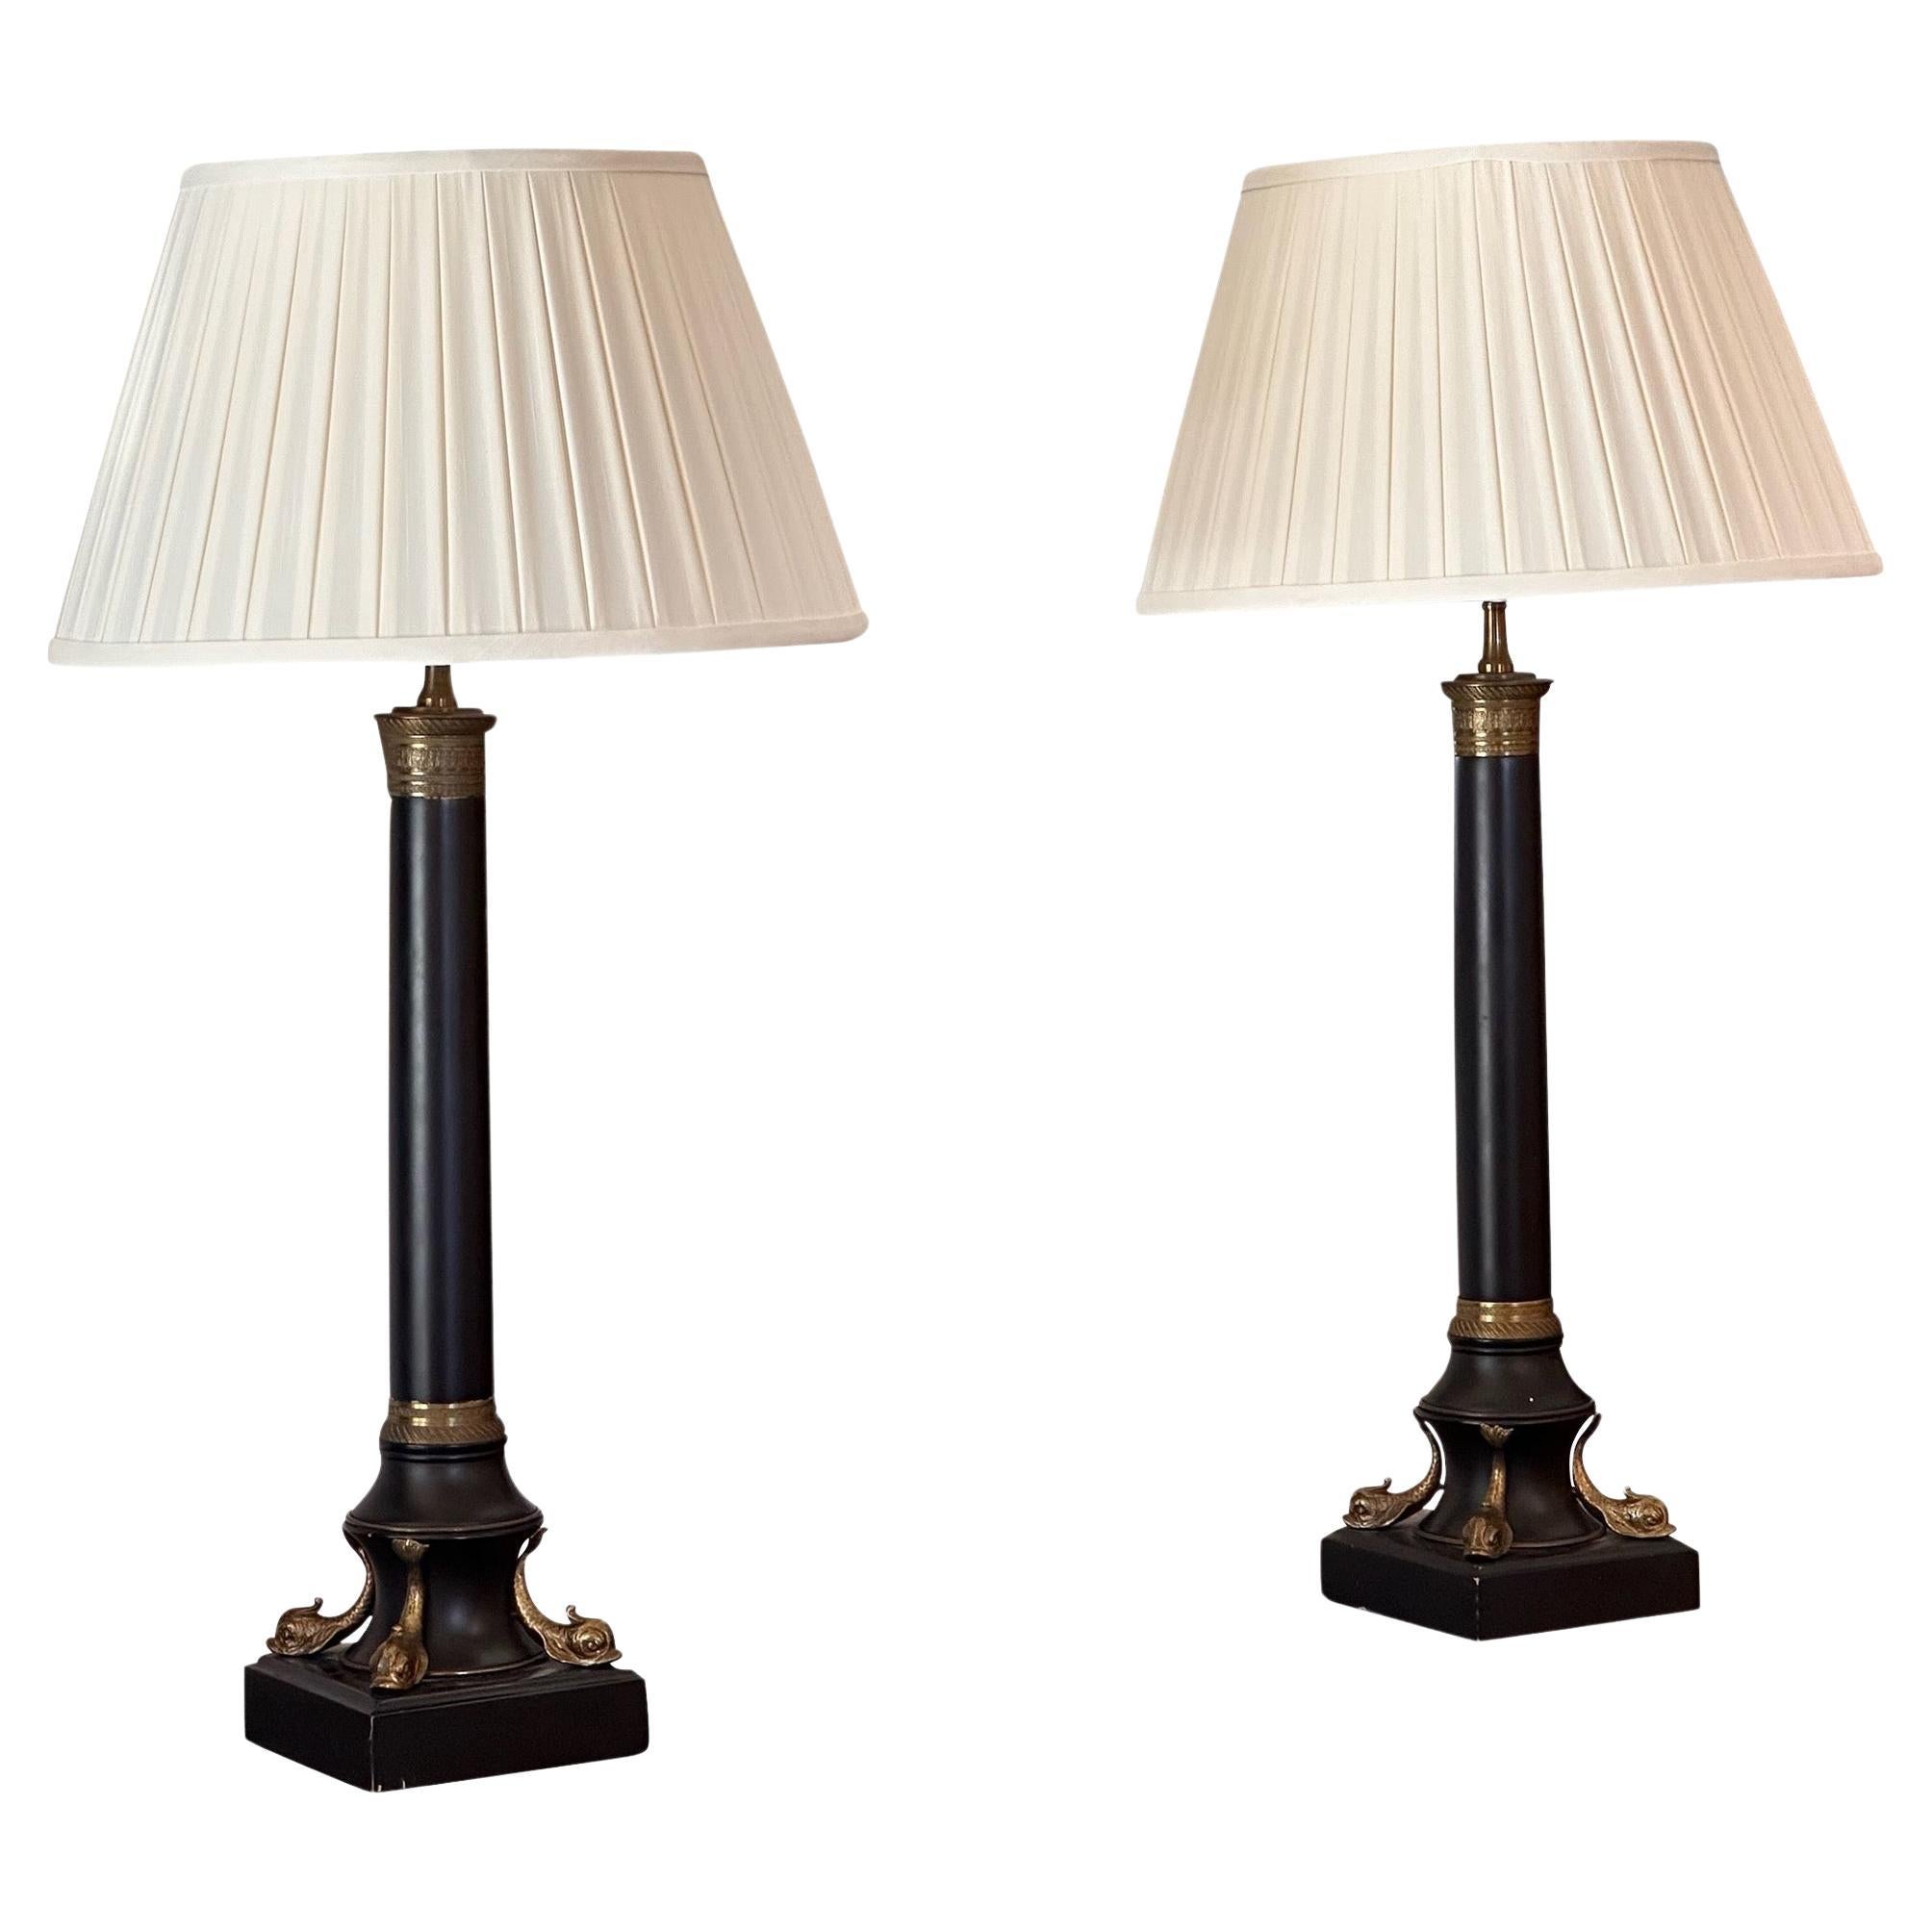 1950s French Empire Column Lamps